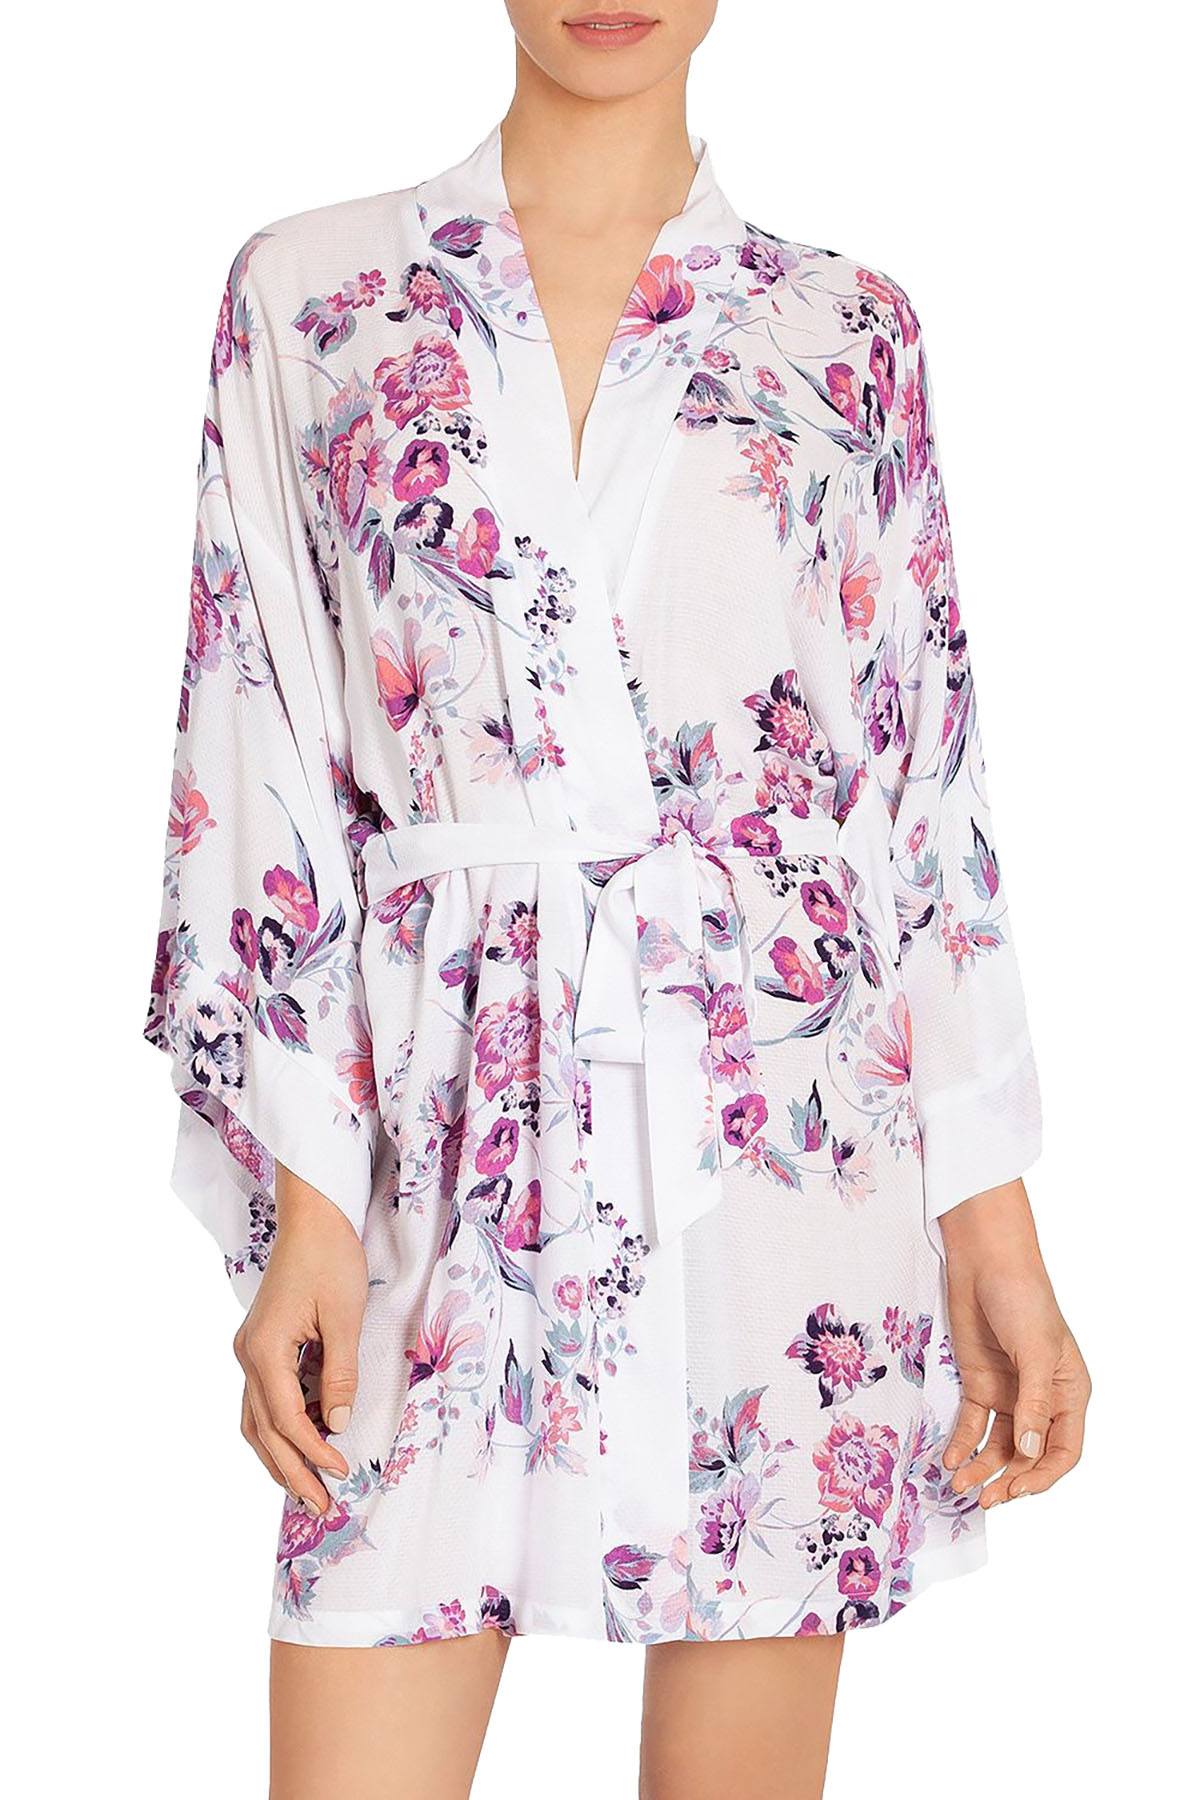 In Bloom By Jonquil Floral Wrap Kimono in Ivory/Mauve